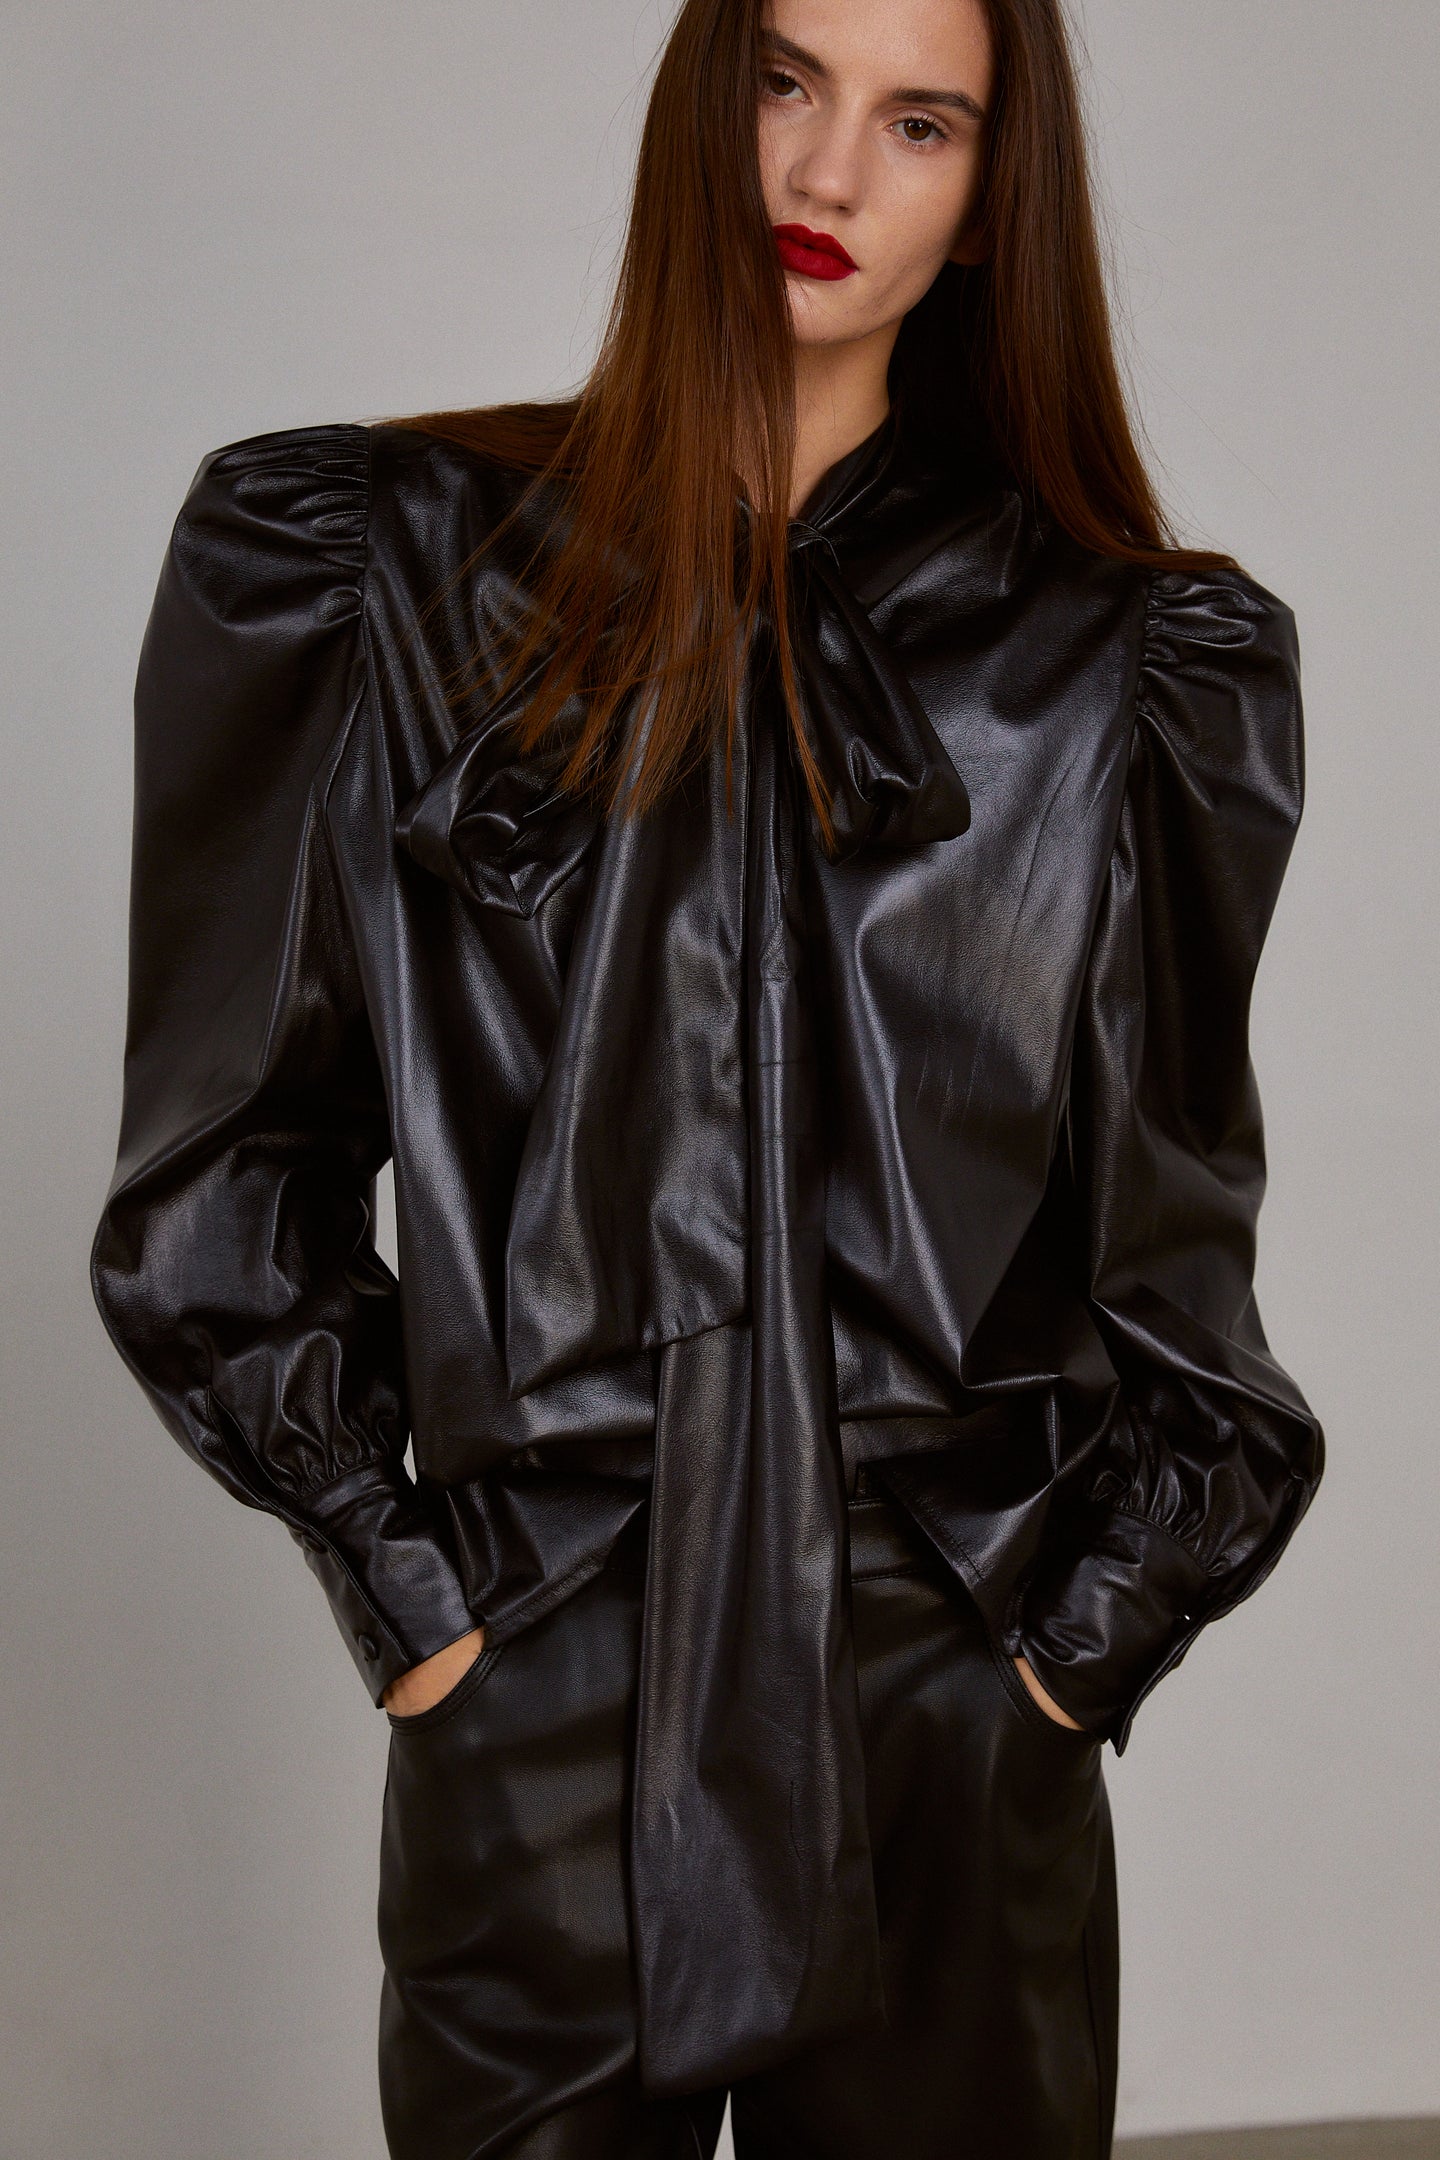 Puffed Tie Collar Leather Blouse, Black – SourceUnknown